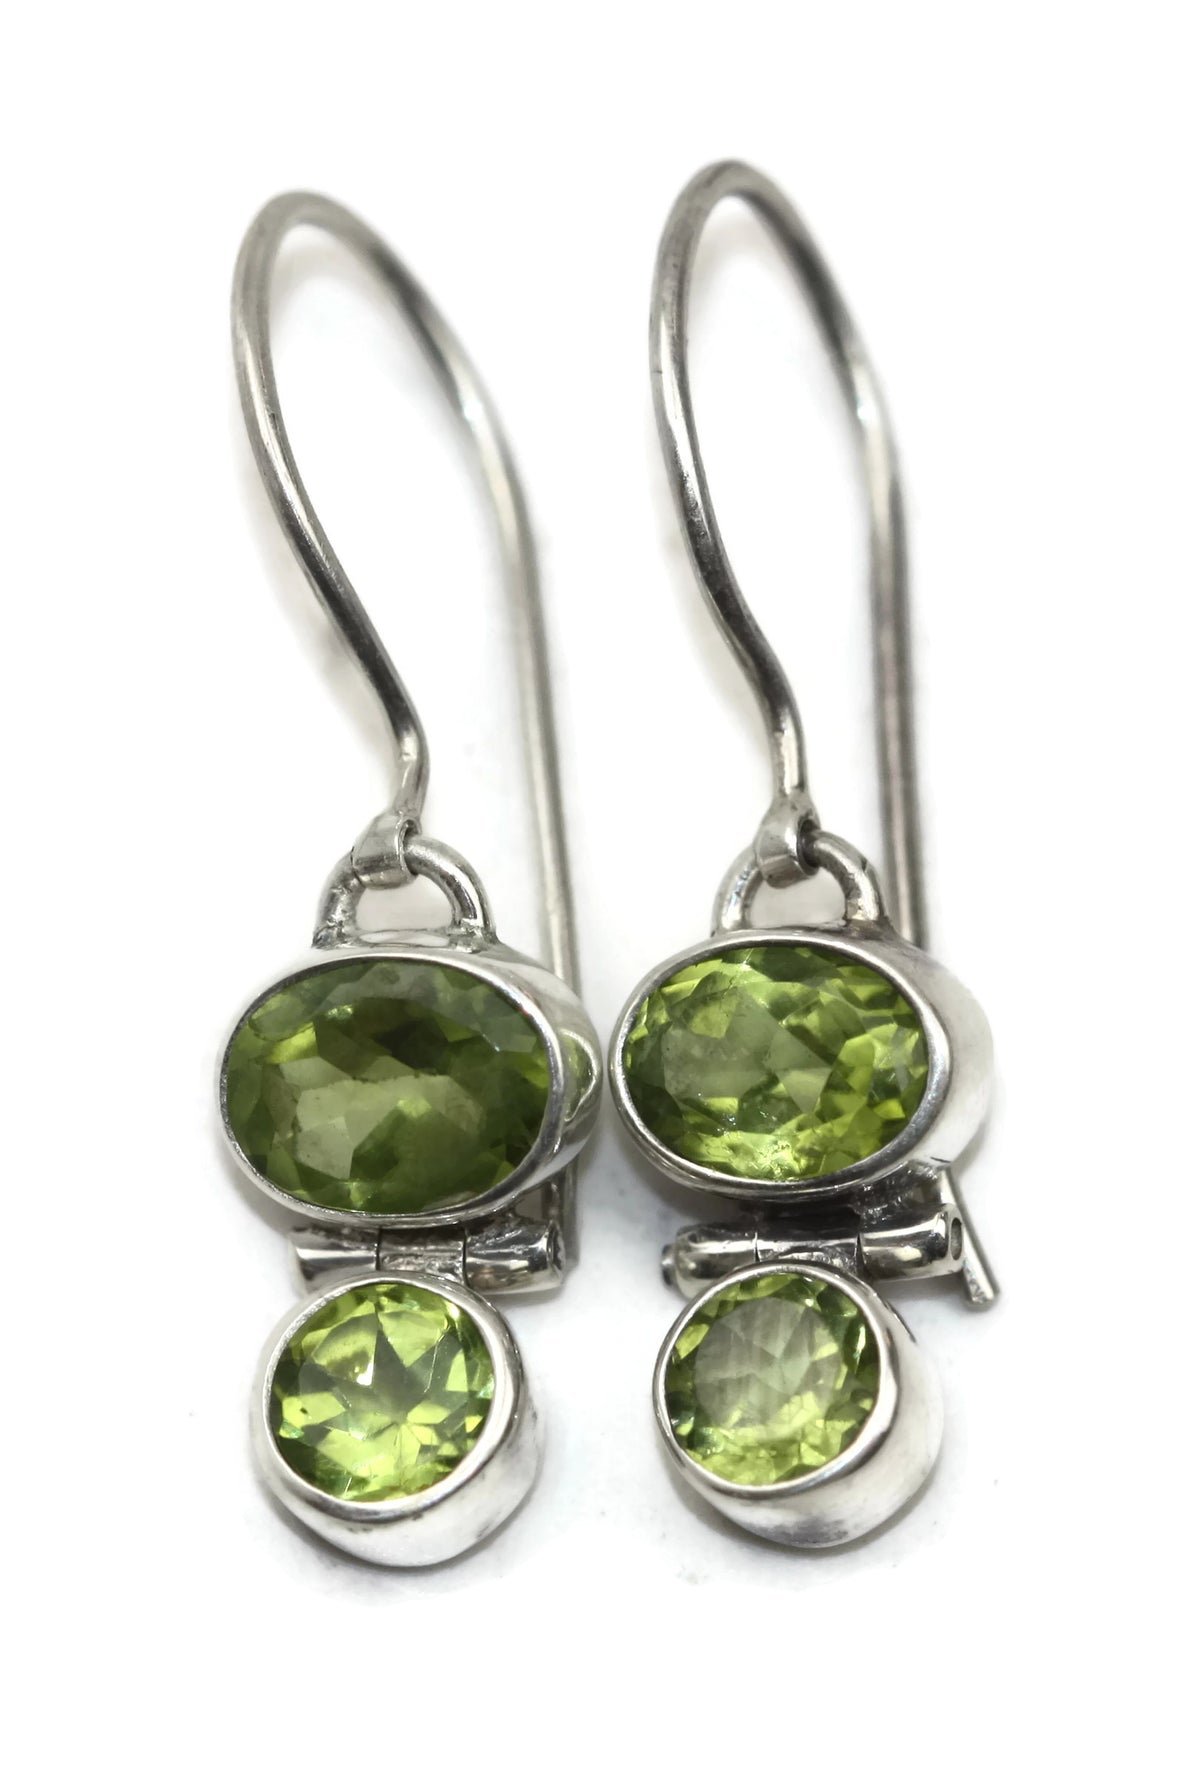 Handmade 925 Sterling Silver Two Stone Oval and Circle Faceted Peridot Earrings